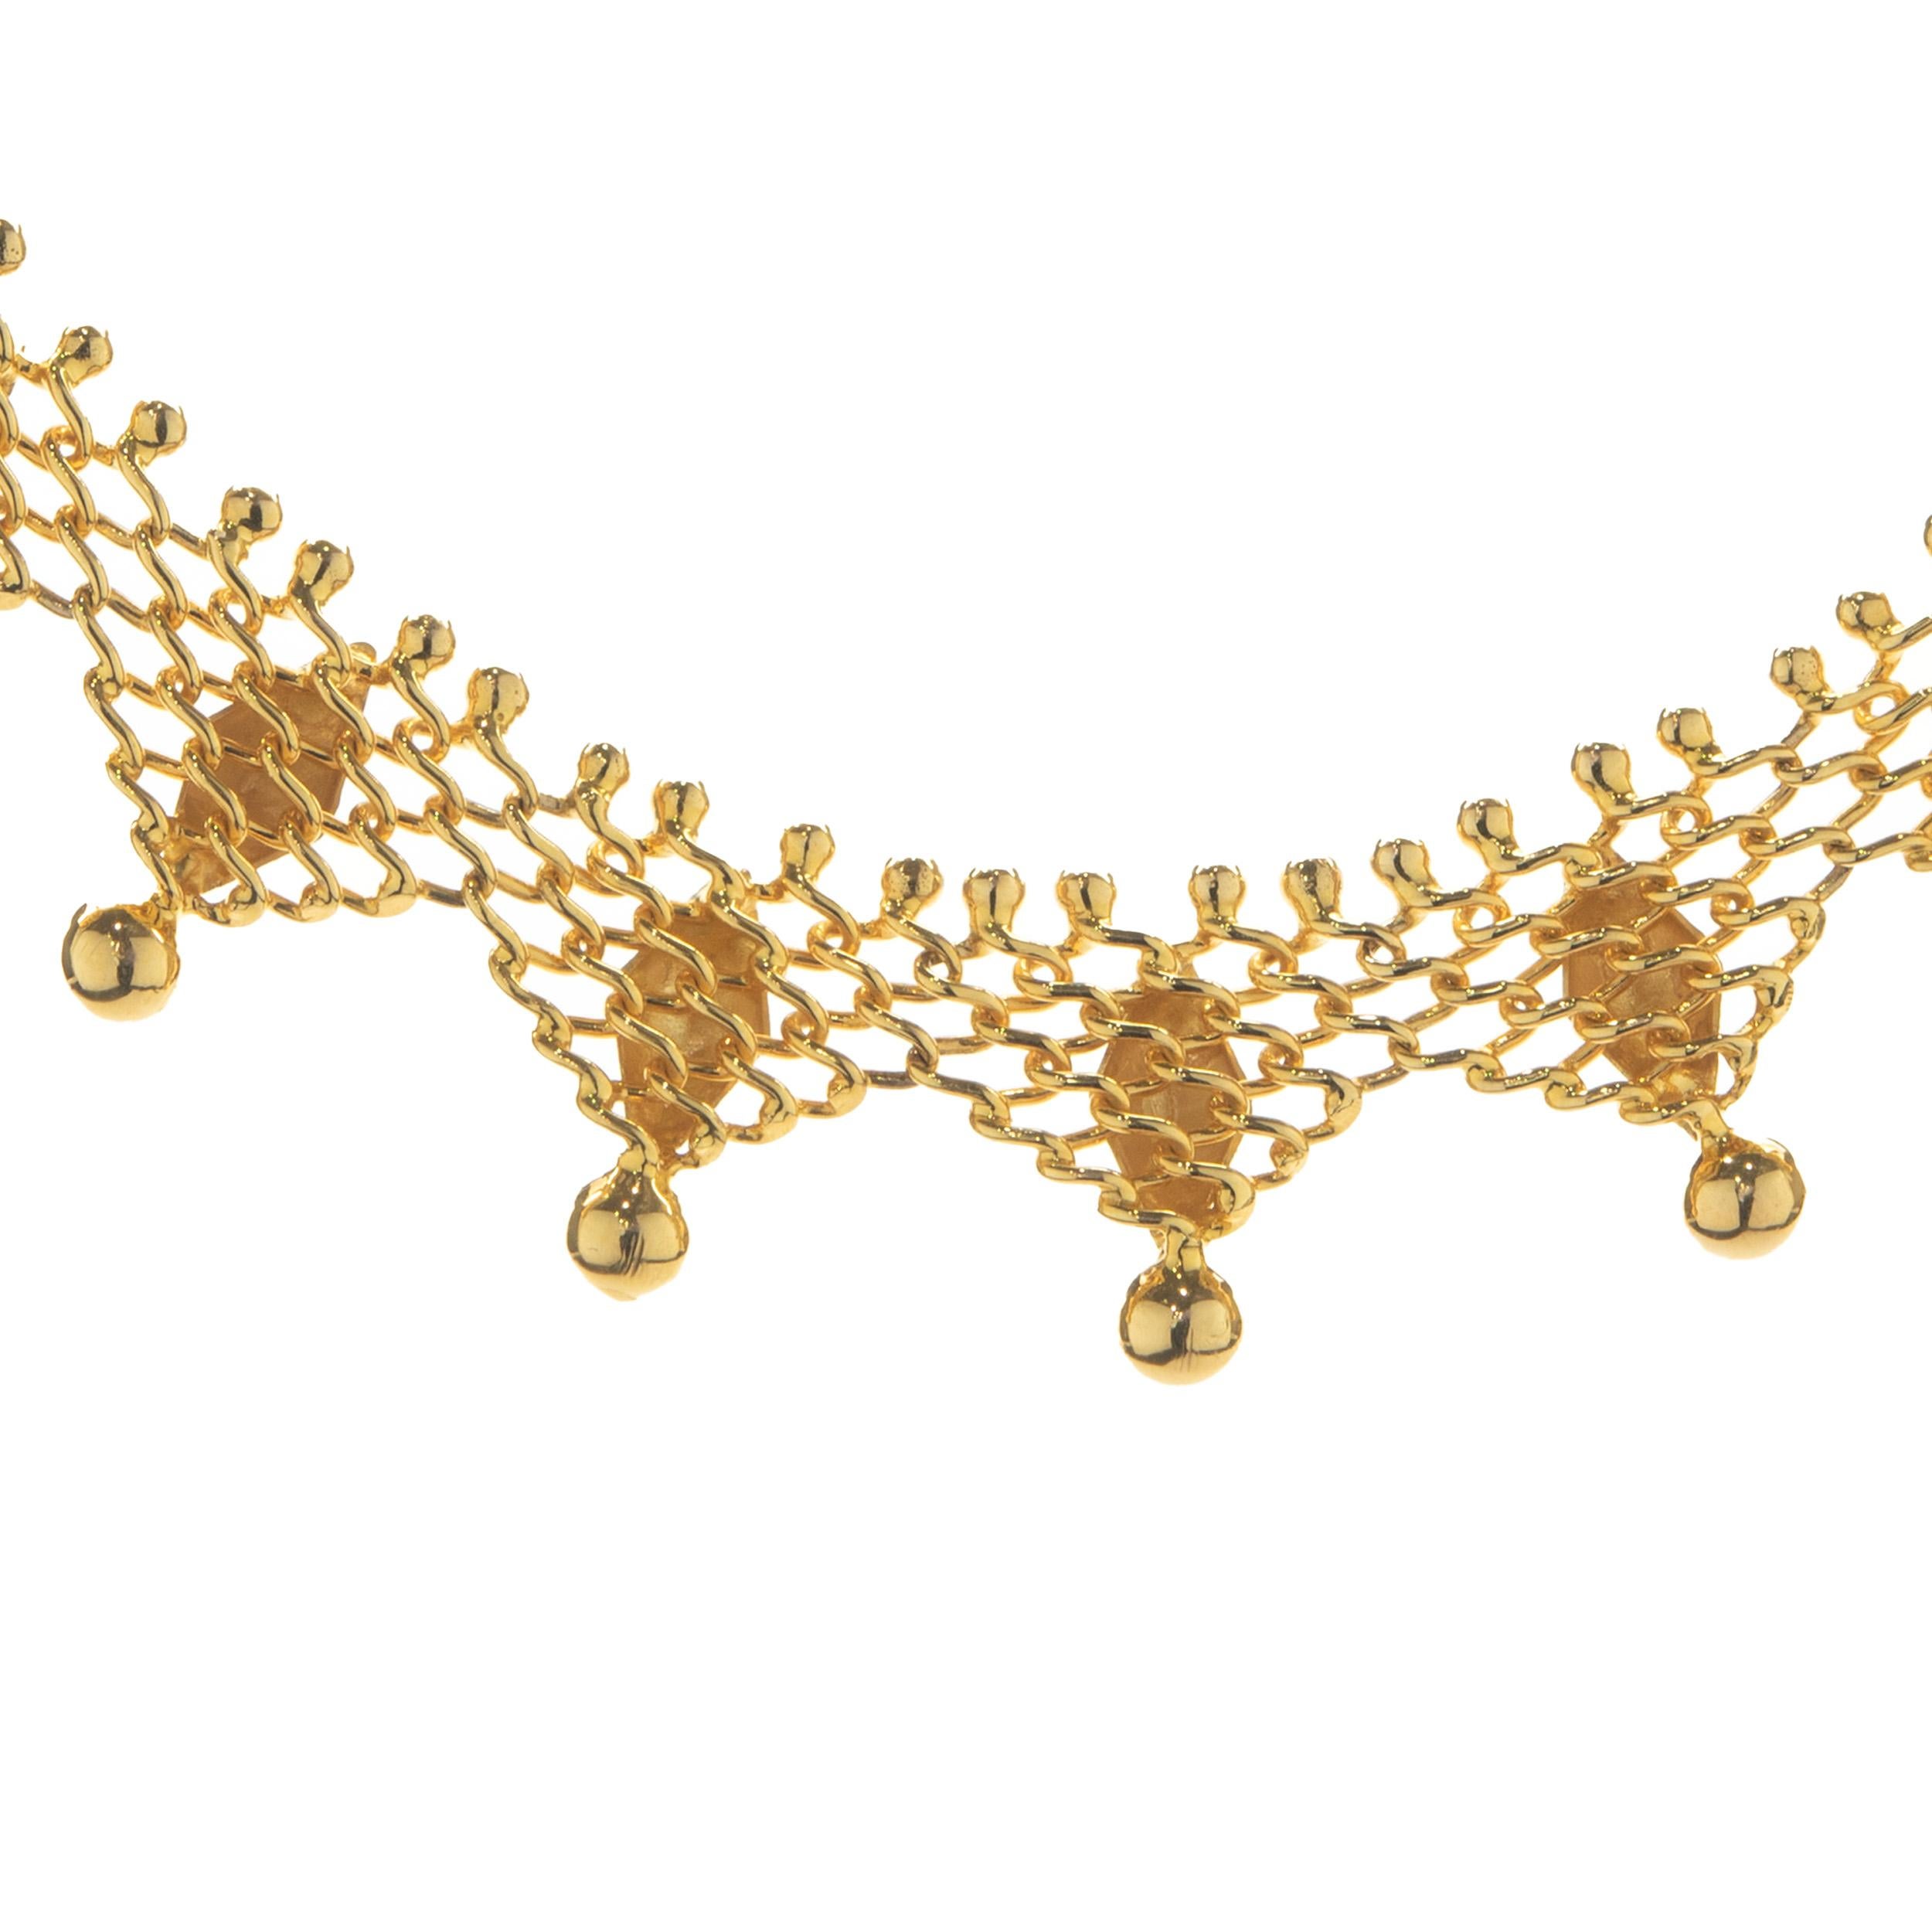 Material: 18K yellow gold
Dimensions: necklace measures 16-inches in length
Weight: 27.42 grams